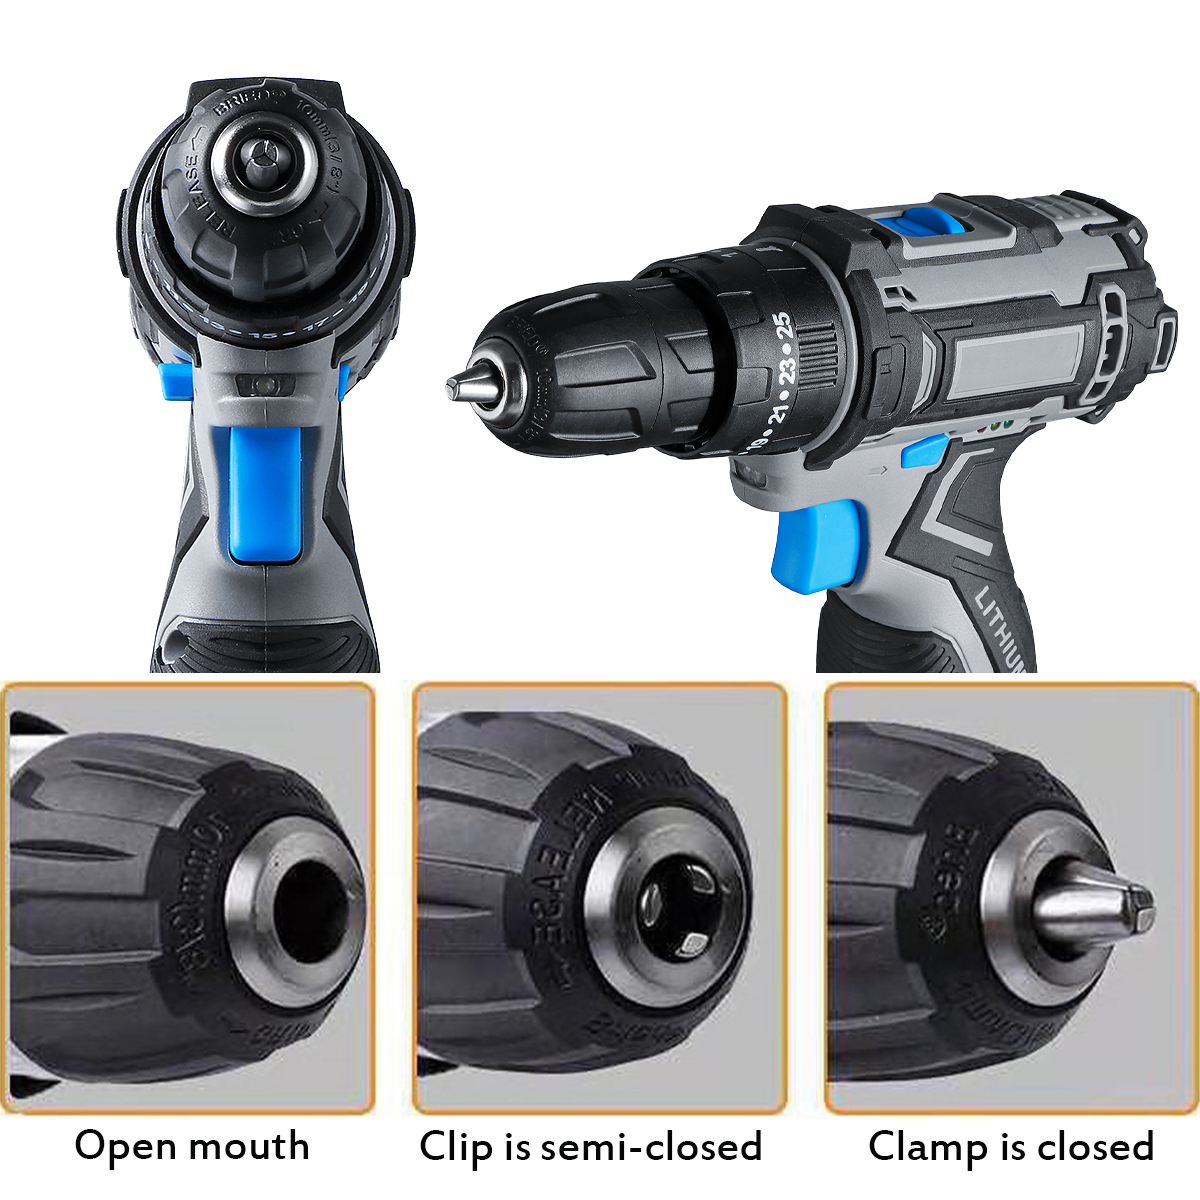 48Nm-25V-Electric-Drill-Cordless-Screwdriver-4000mAh-25-Gears-Household-Power-Tool-W-1pc-Battery-1792576-10